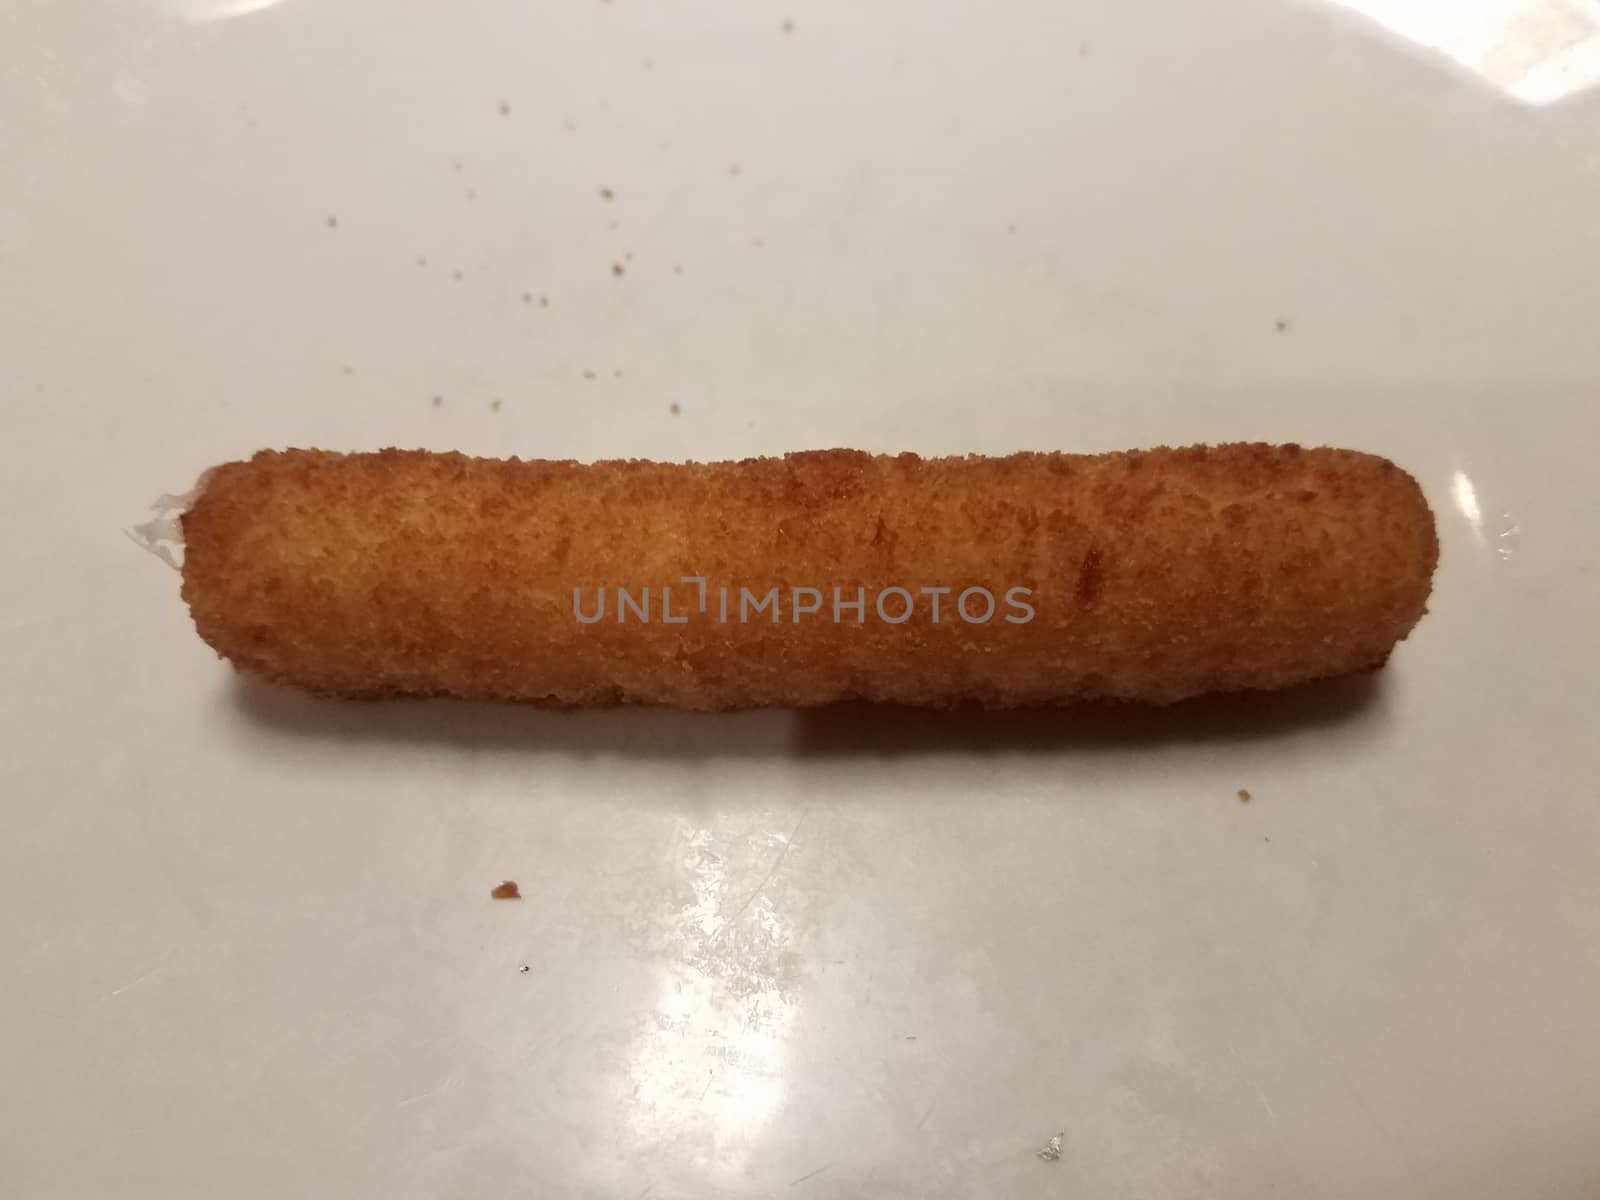 fried breaded mozzarella cheese stick on white plate by stockphotofan1